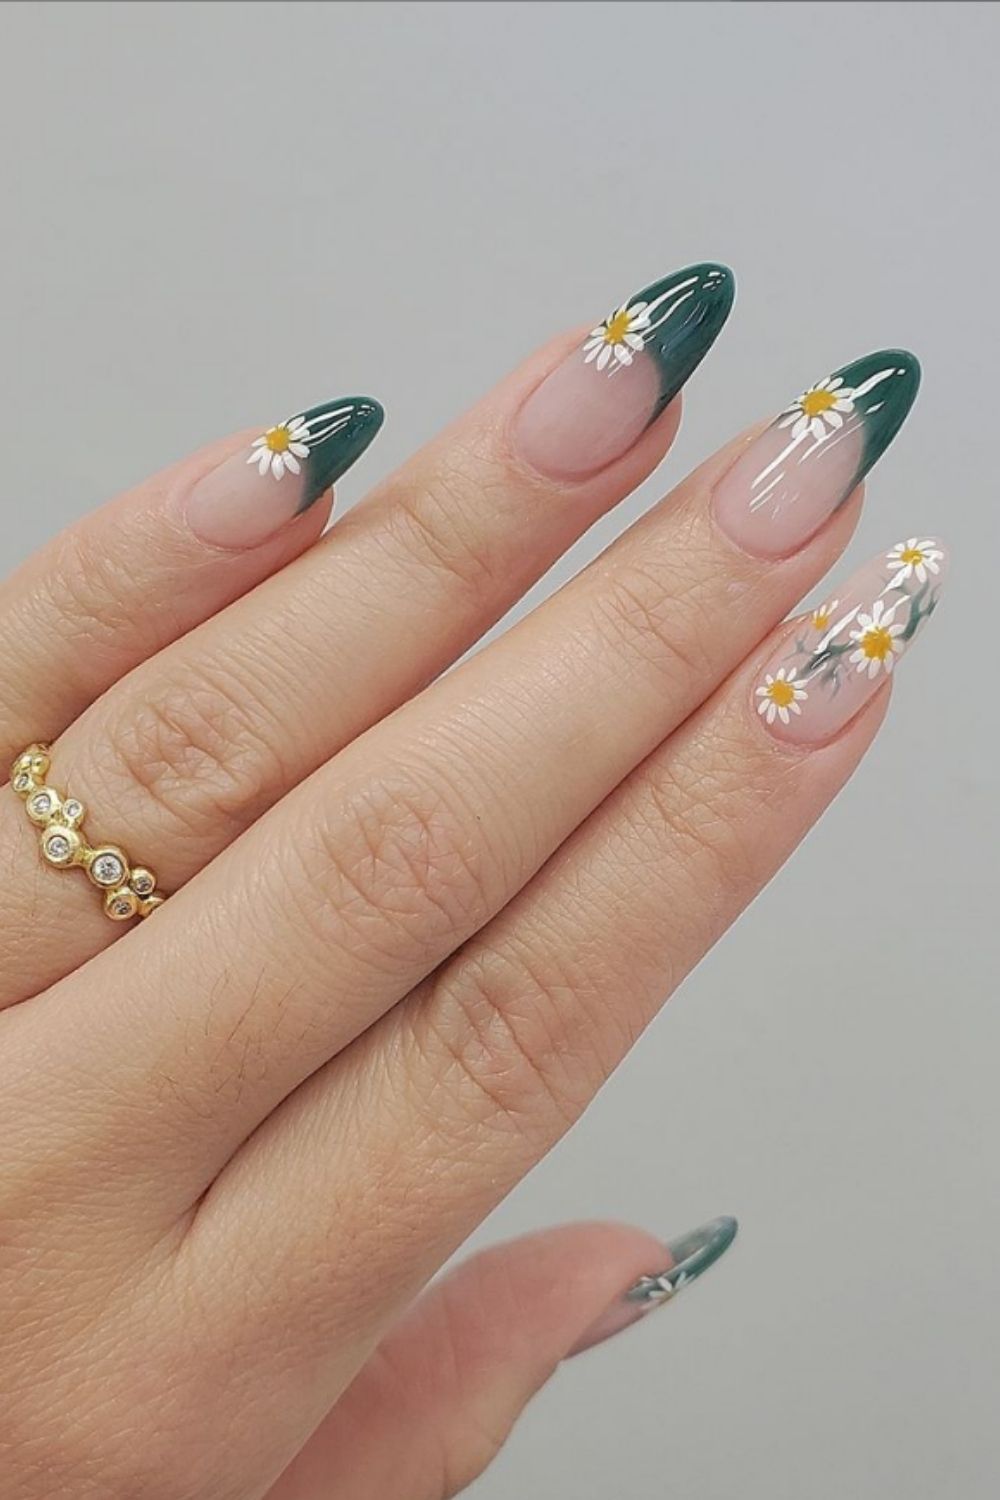 daisy tips Top 80+ Easiest Spring Nail Designs - 2